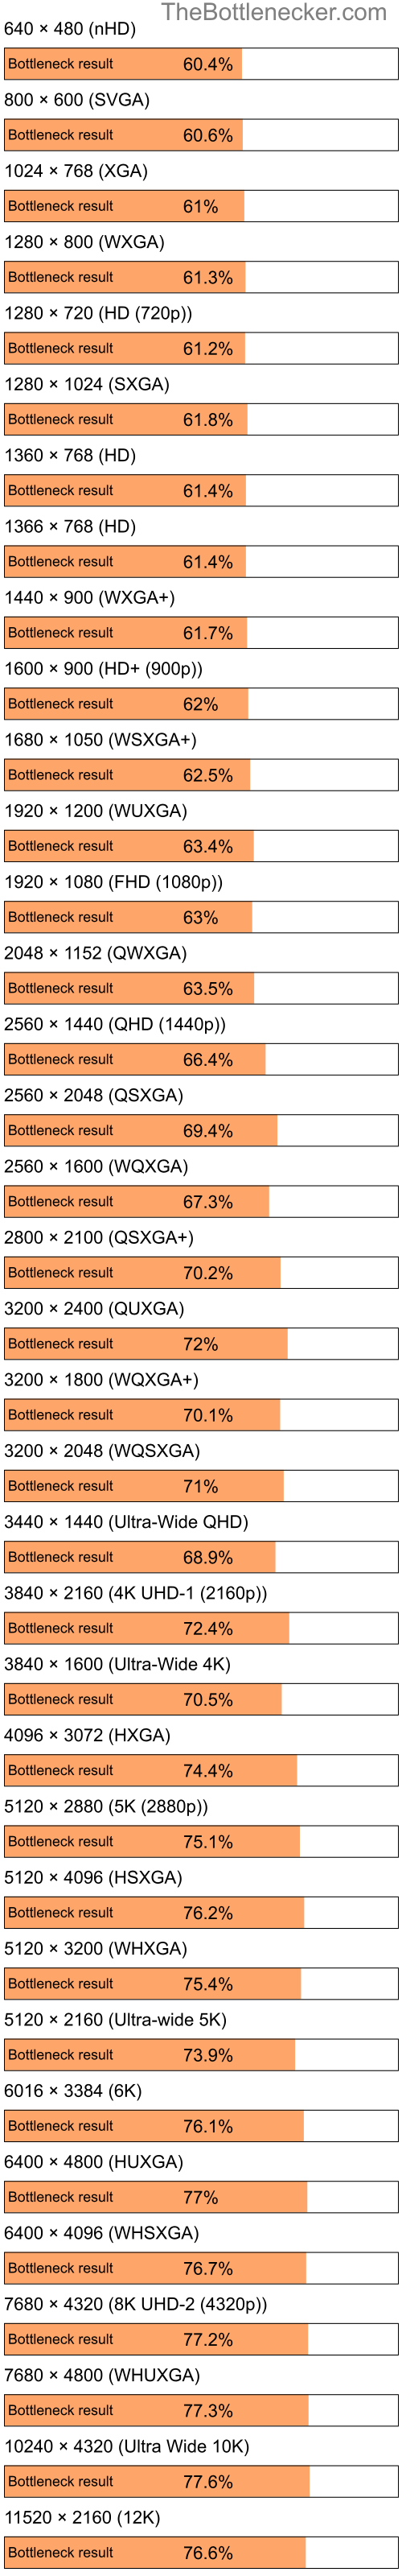 Bottleneck results by resolution for Intel Pentium 4 and NVIDIA GeForce 8600 GS in General Tasks